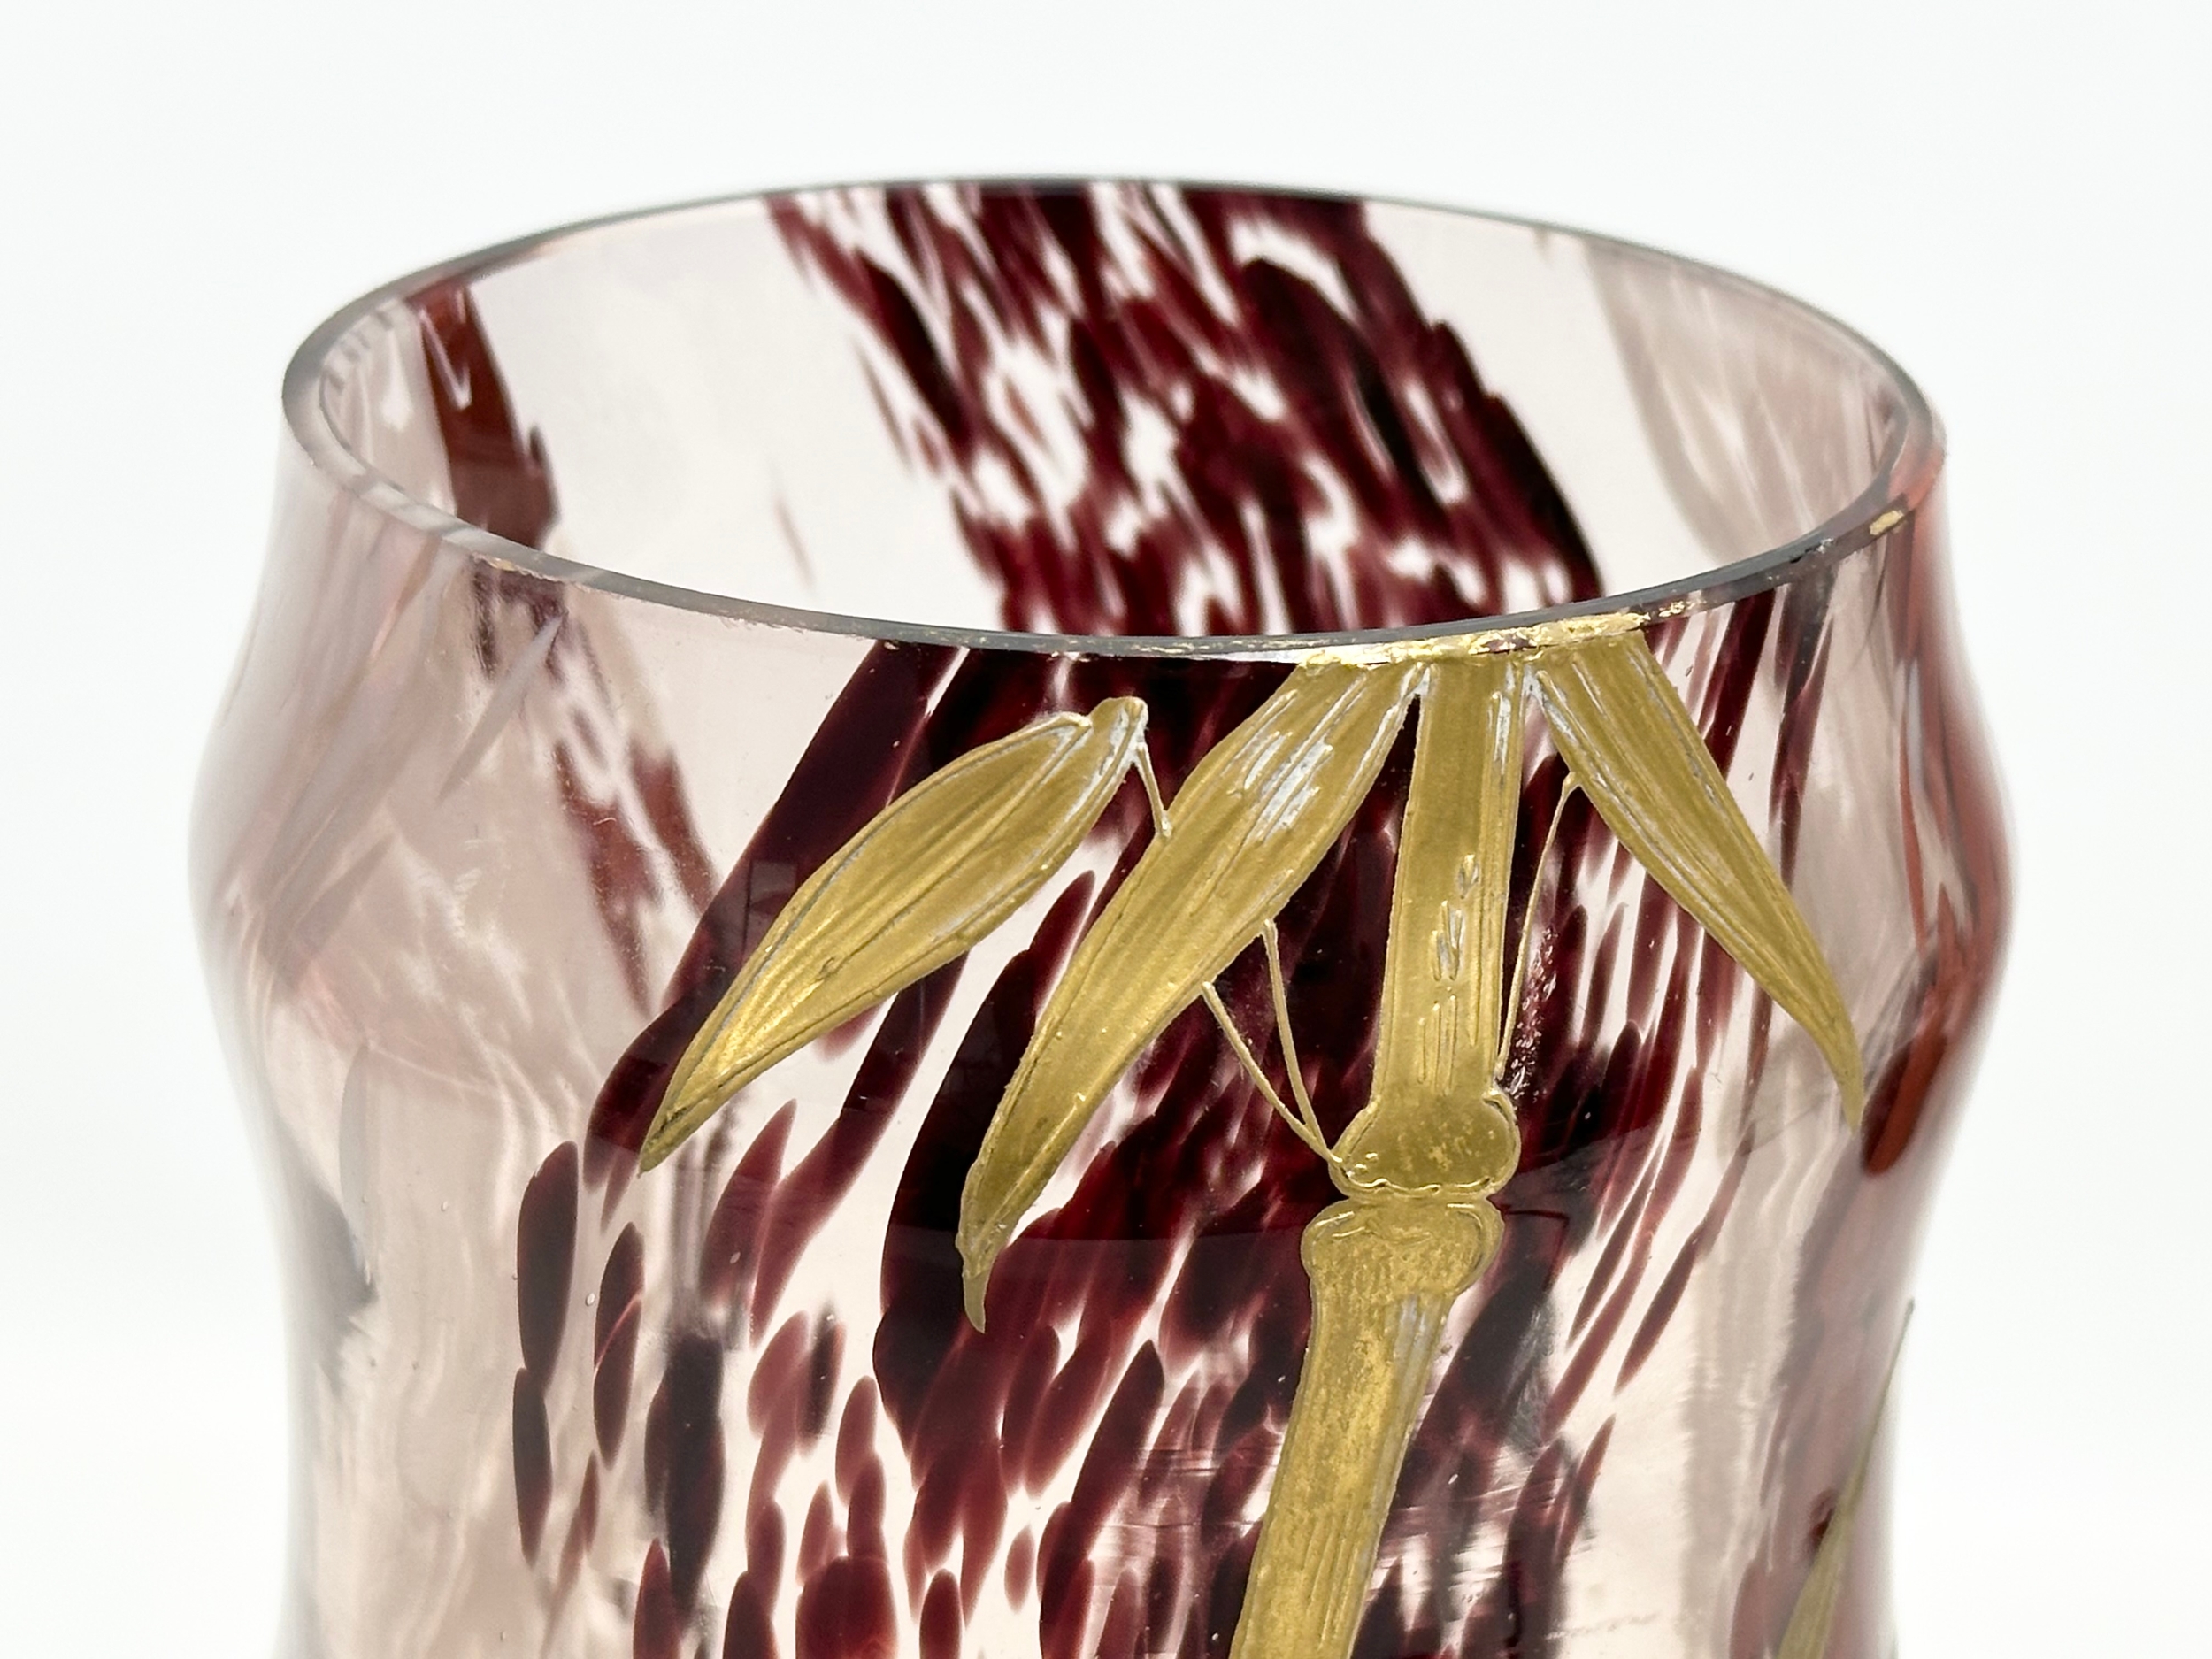 A rare Art Nouveau ‘Bamboo’ glass vase by Ernest Baptiste Leveille. Early 20th century. Circa - Image 3 of 4